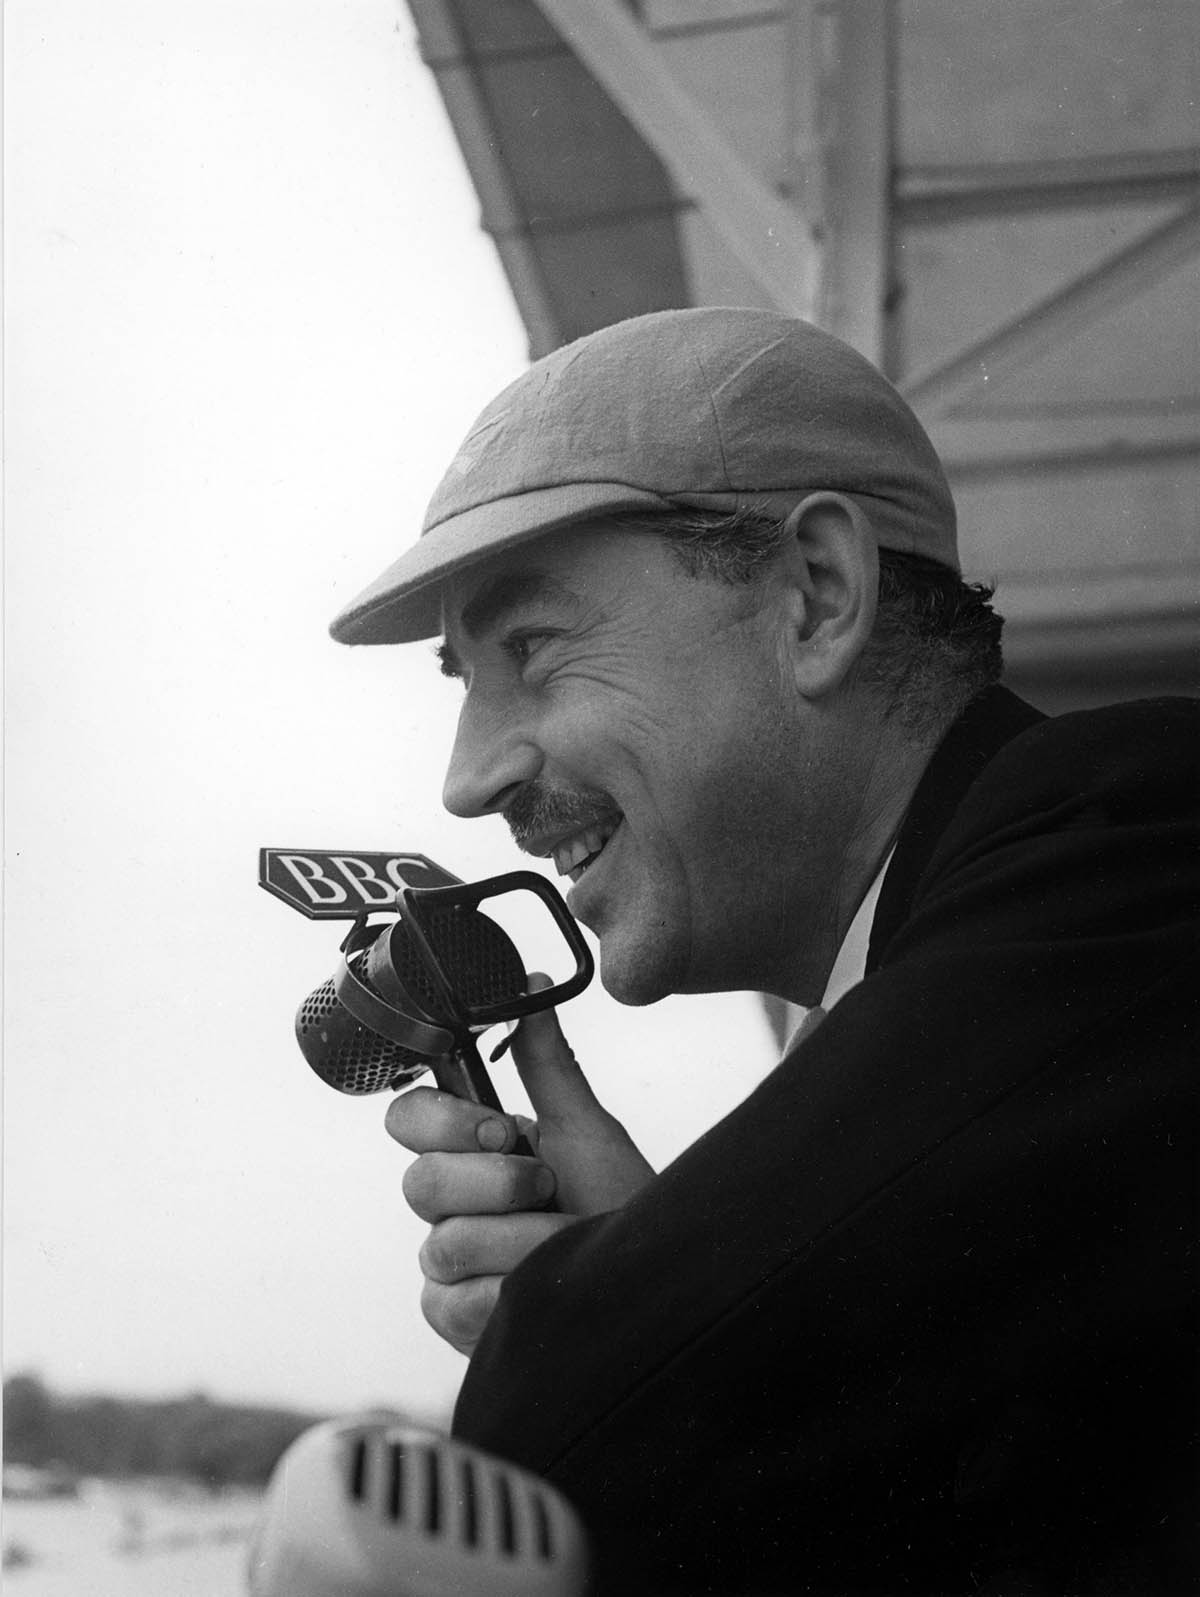 John Snagg, announcer, is pictured at a sporting event, holding a BBC microphone. This is a profile image, and he is wearing a peaked cap.